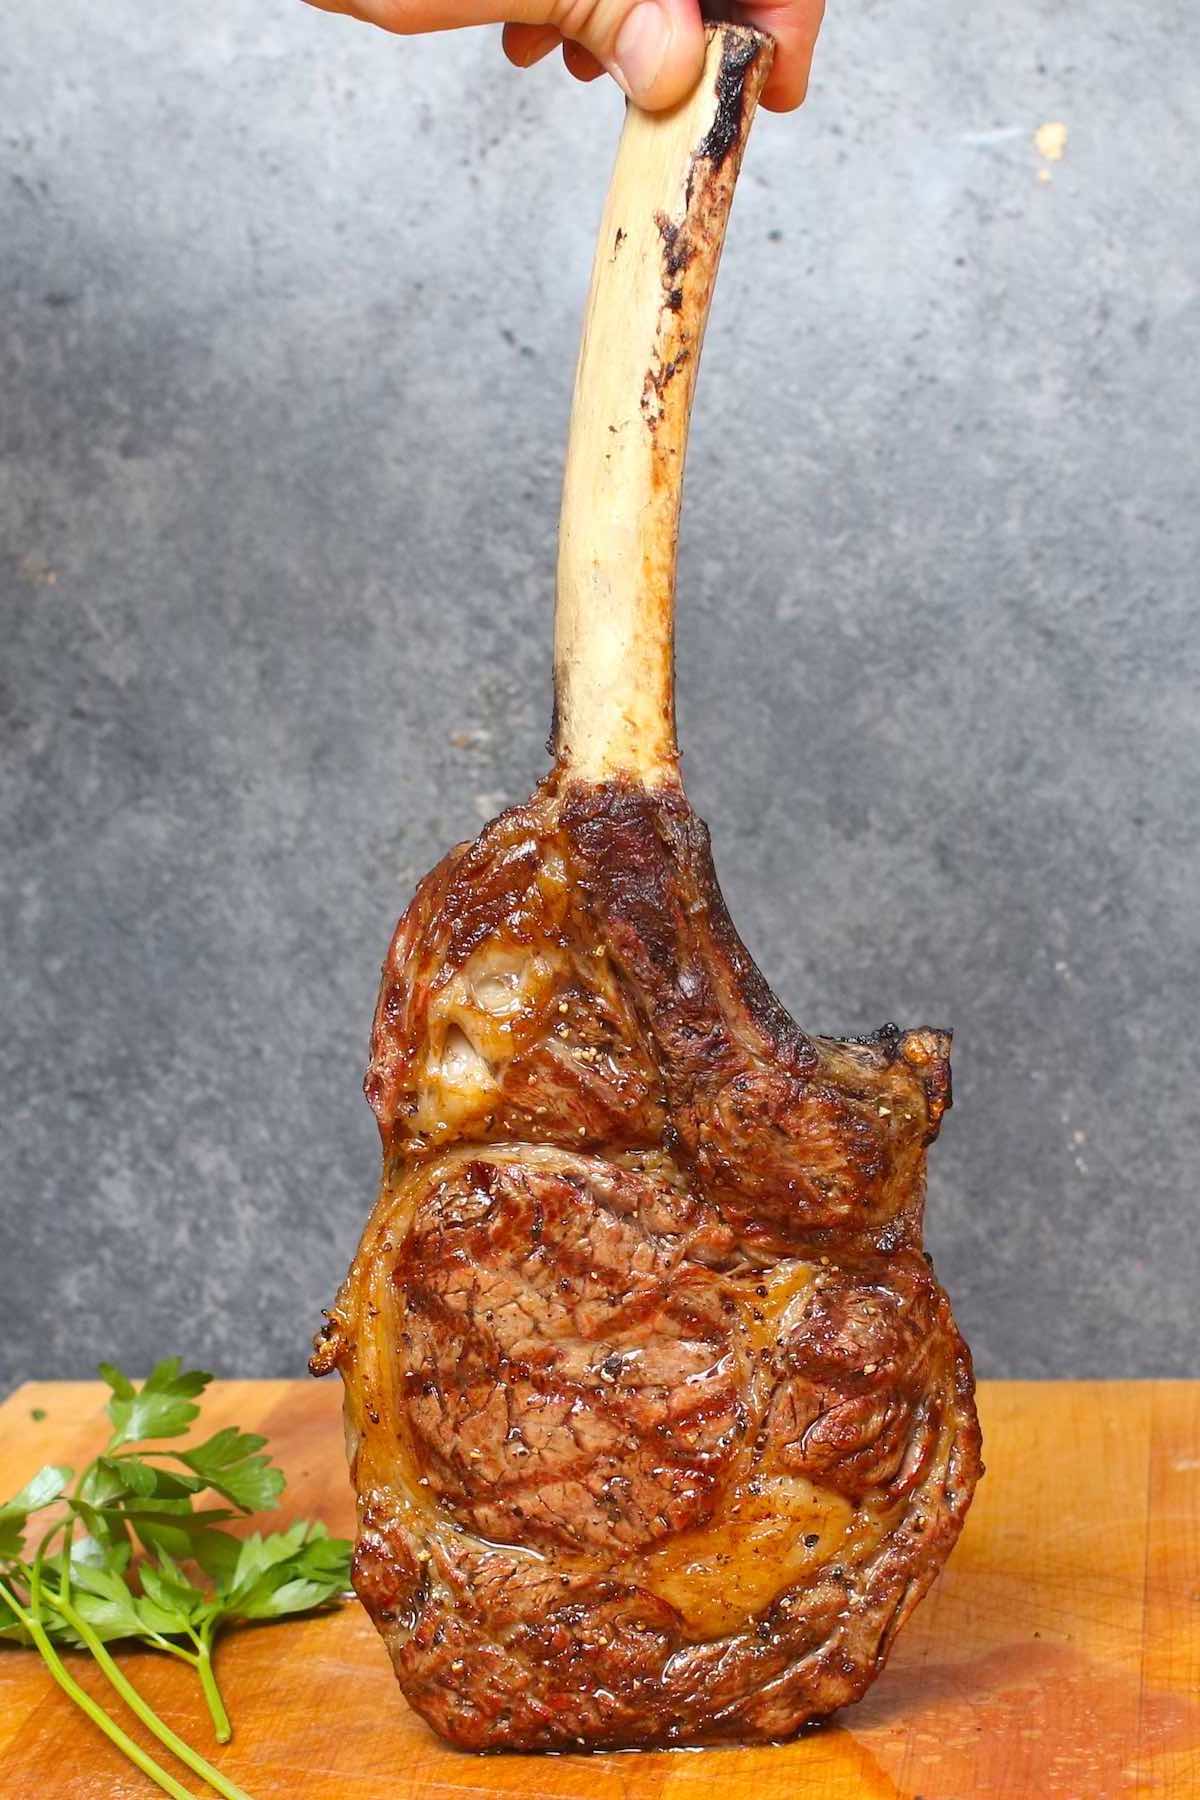 Grilled tomahawk ribeye steak showing crosshatch grill marks and an extra-long bone